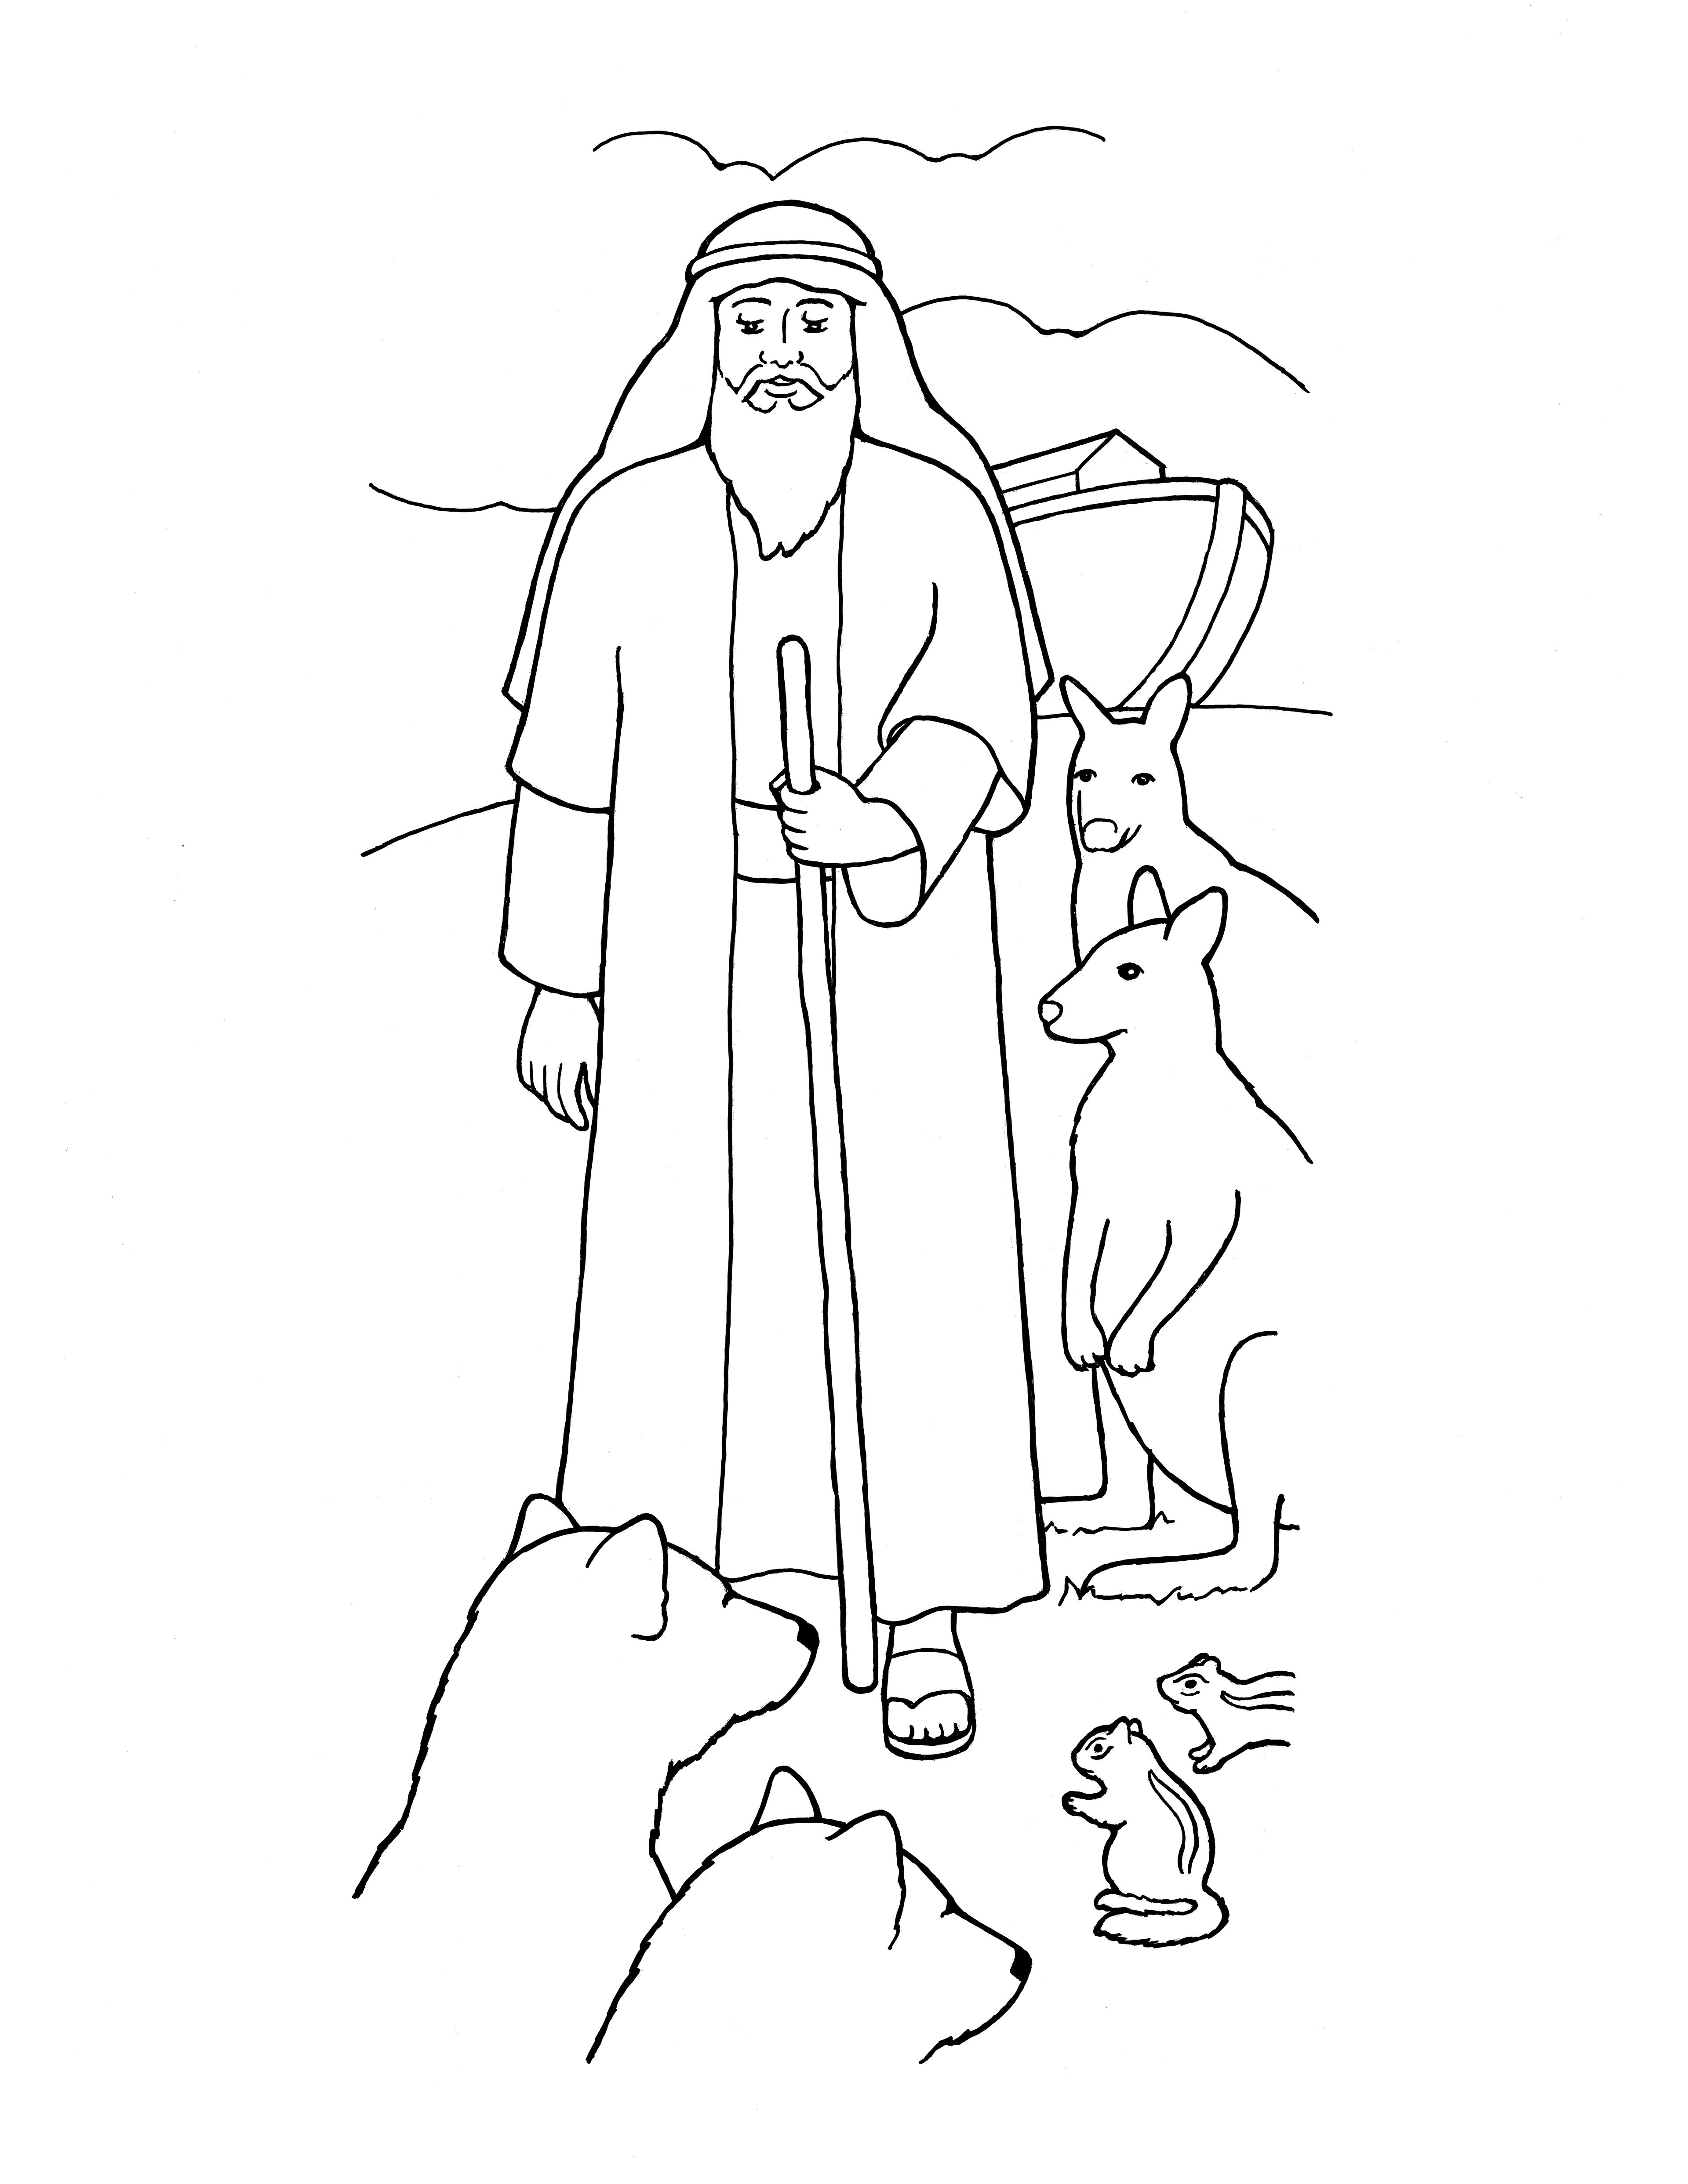 An illustration of Noah and the ark, from the nursery manual Behold Your Little Ones (2008), page 99.